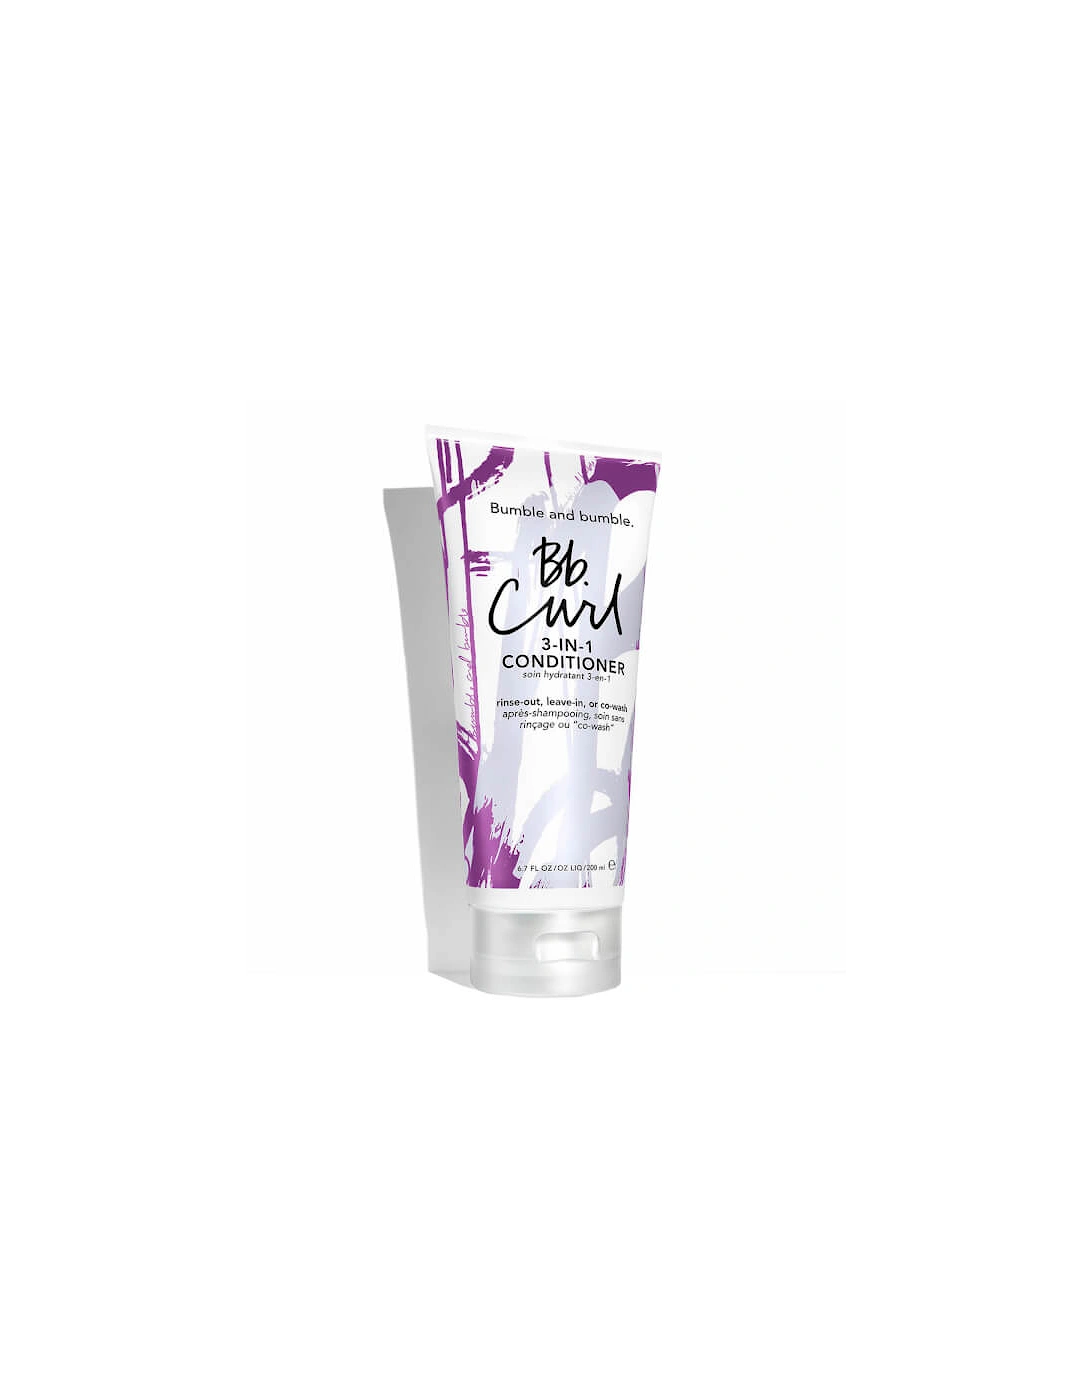 Bumble and bumble Curl 3-in-1 Conditioner 200ml, 2 of 1